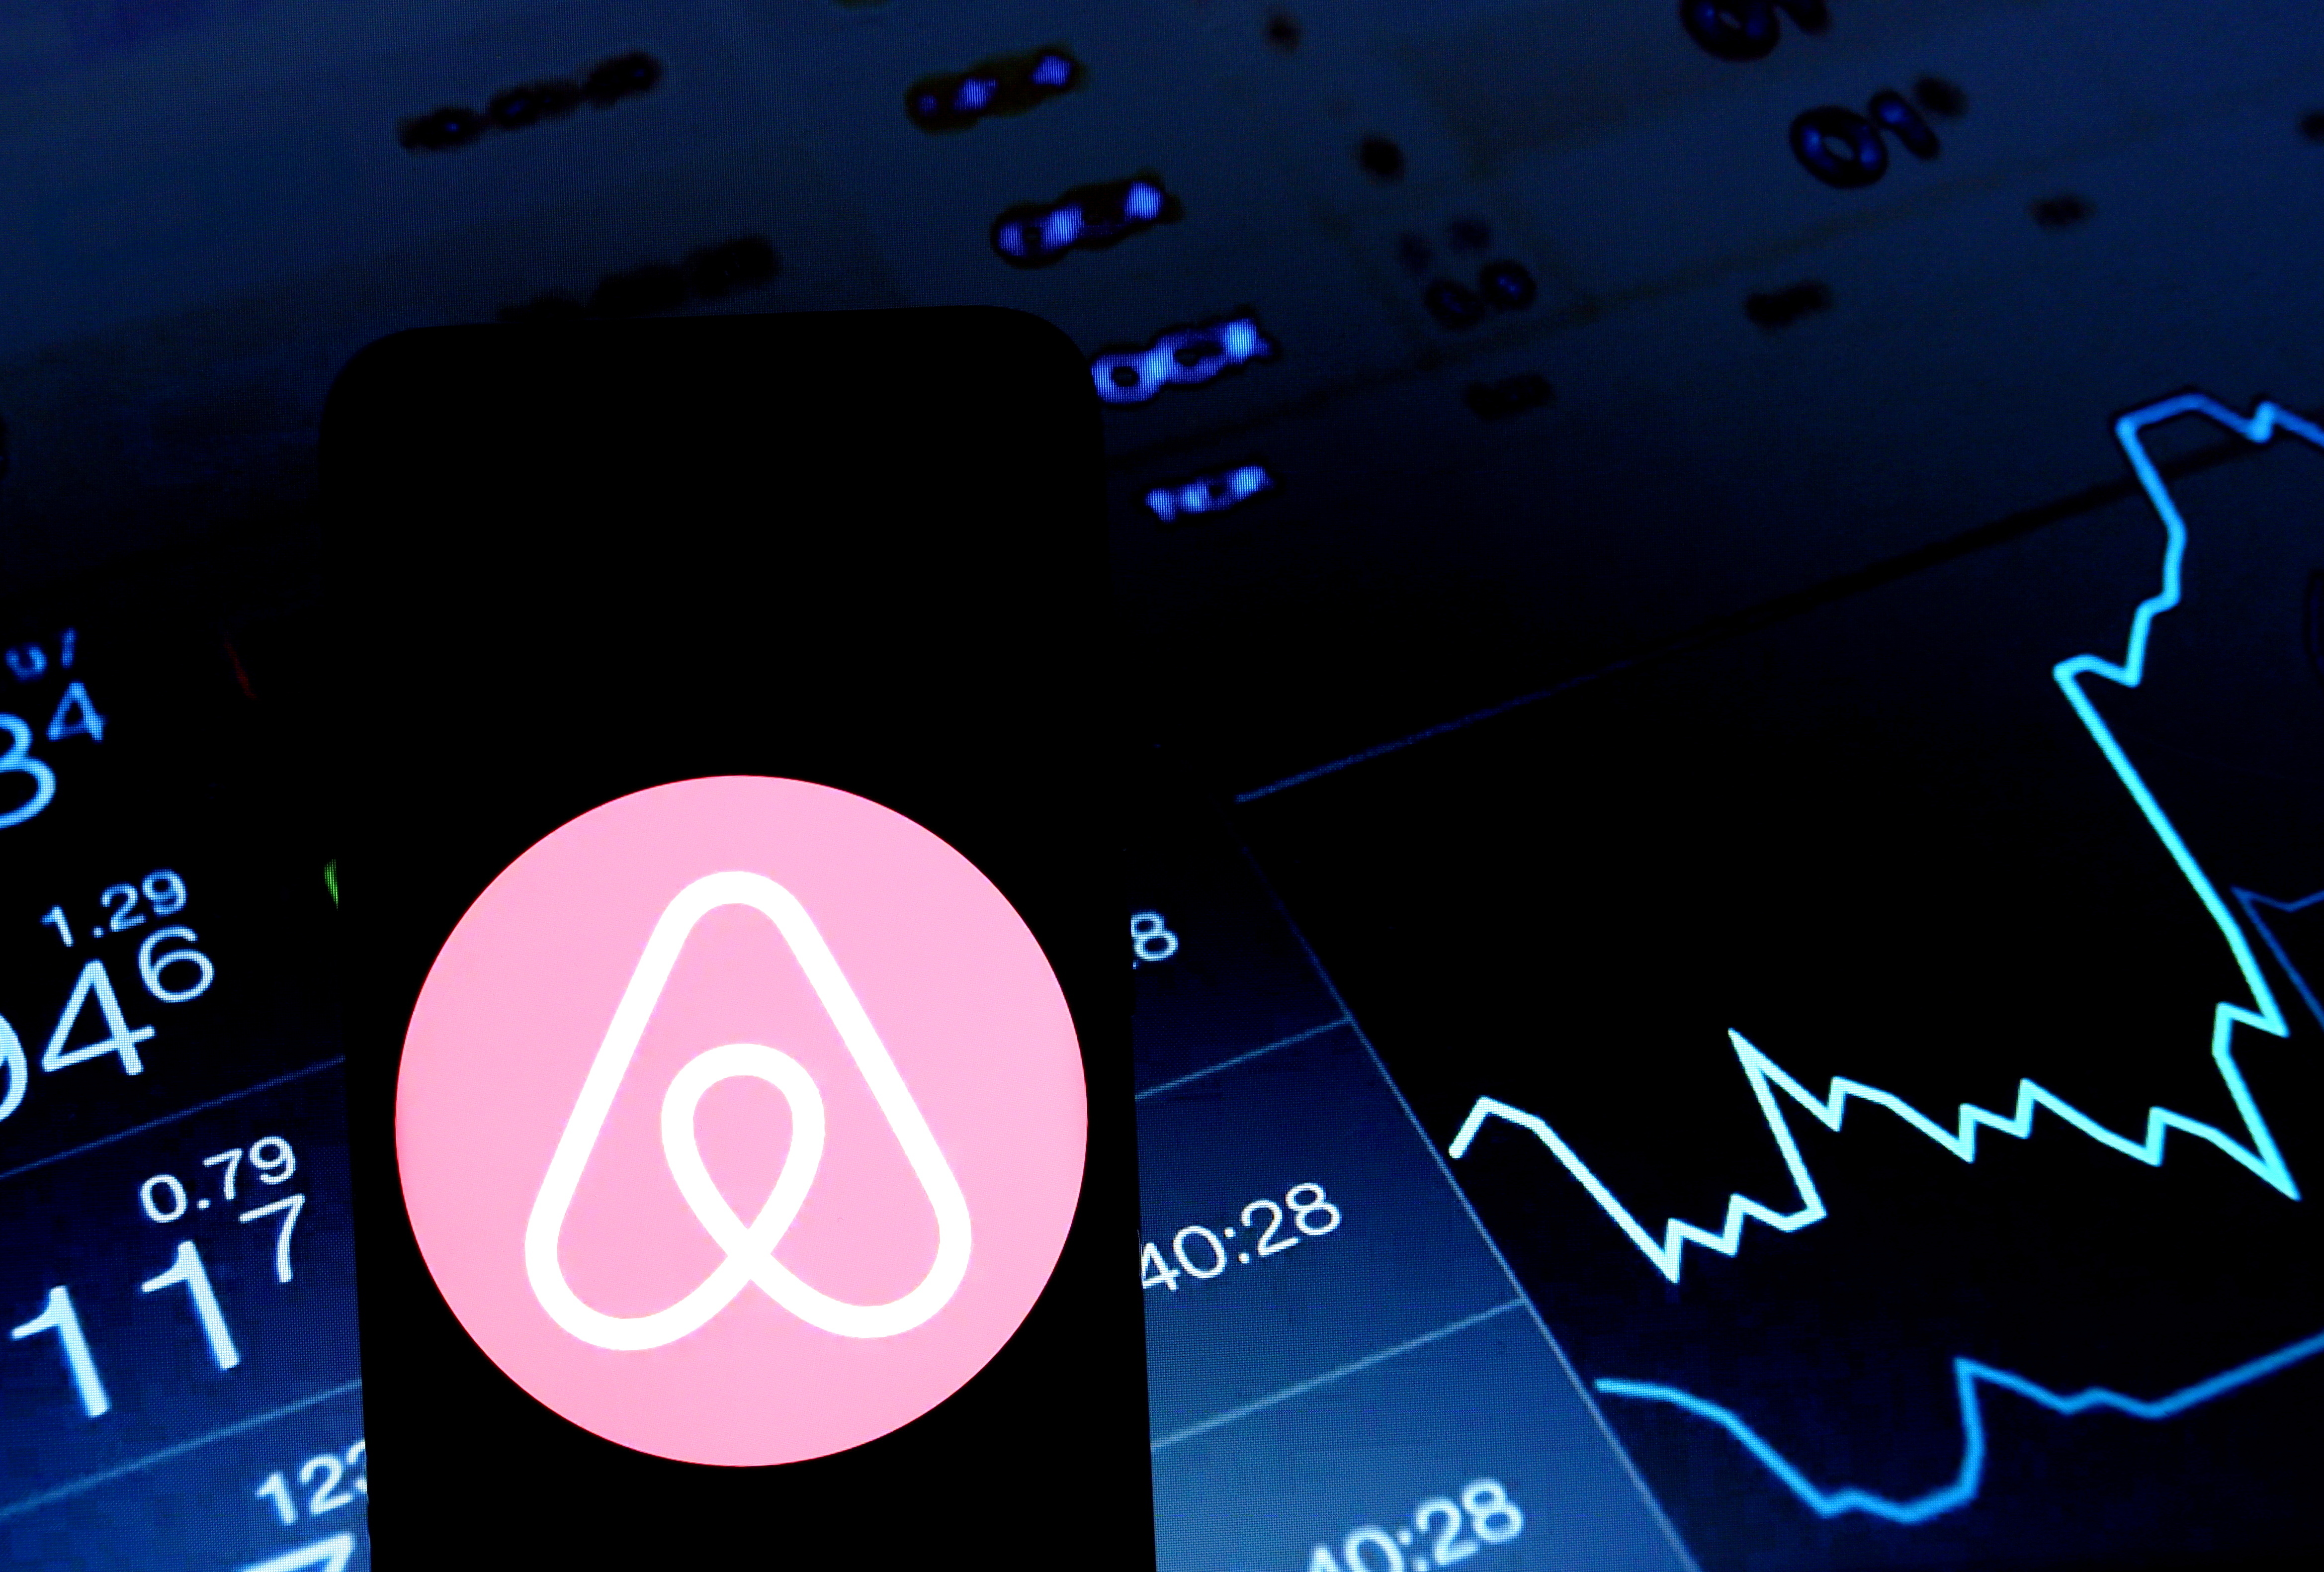 Airbnb's earnings surge after 'incredibly effective' marketing shift